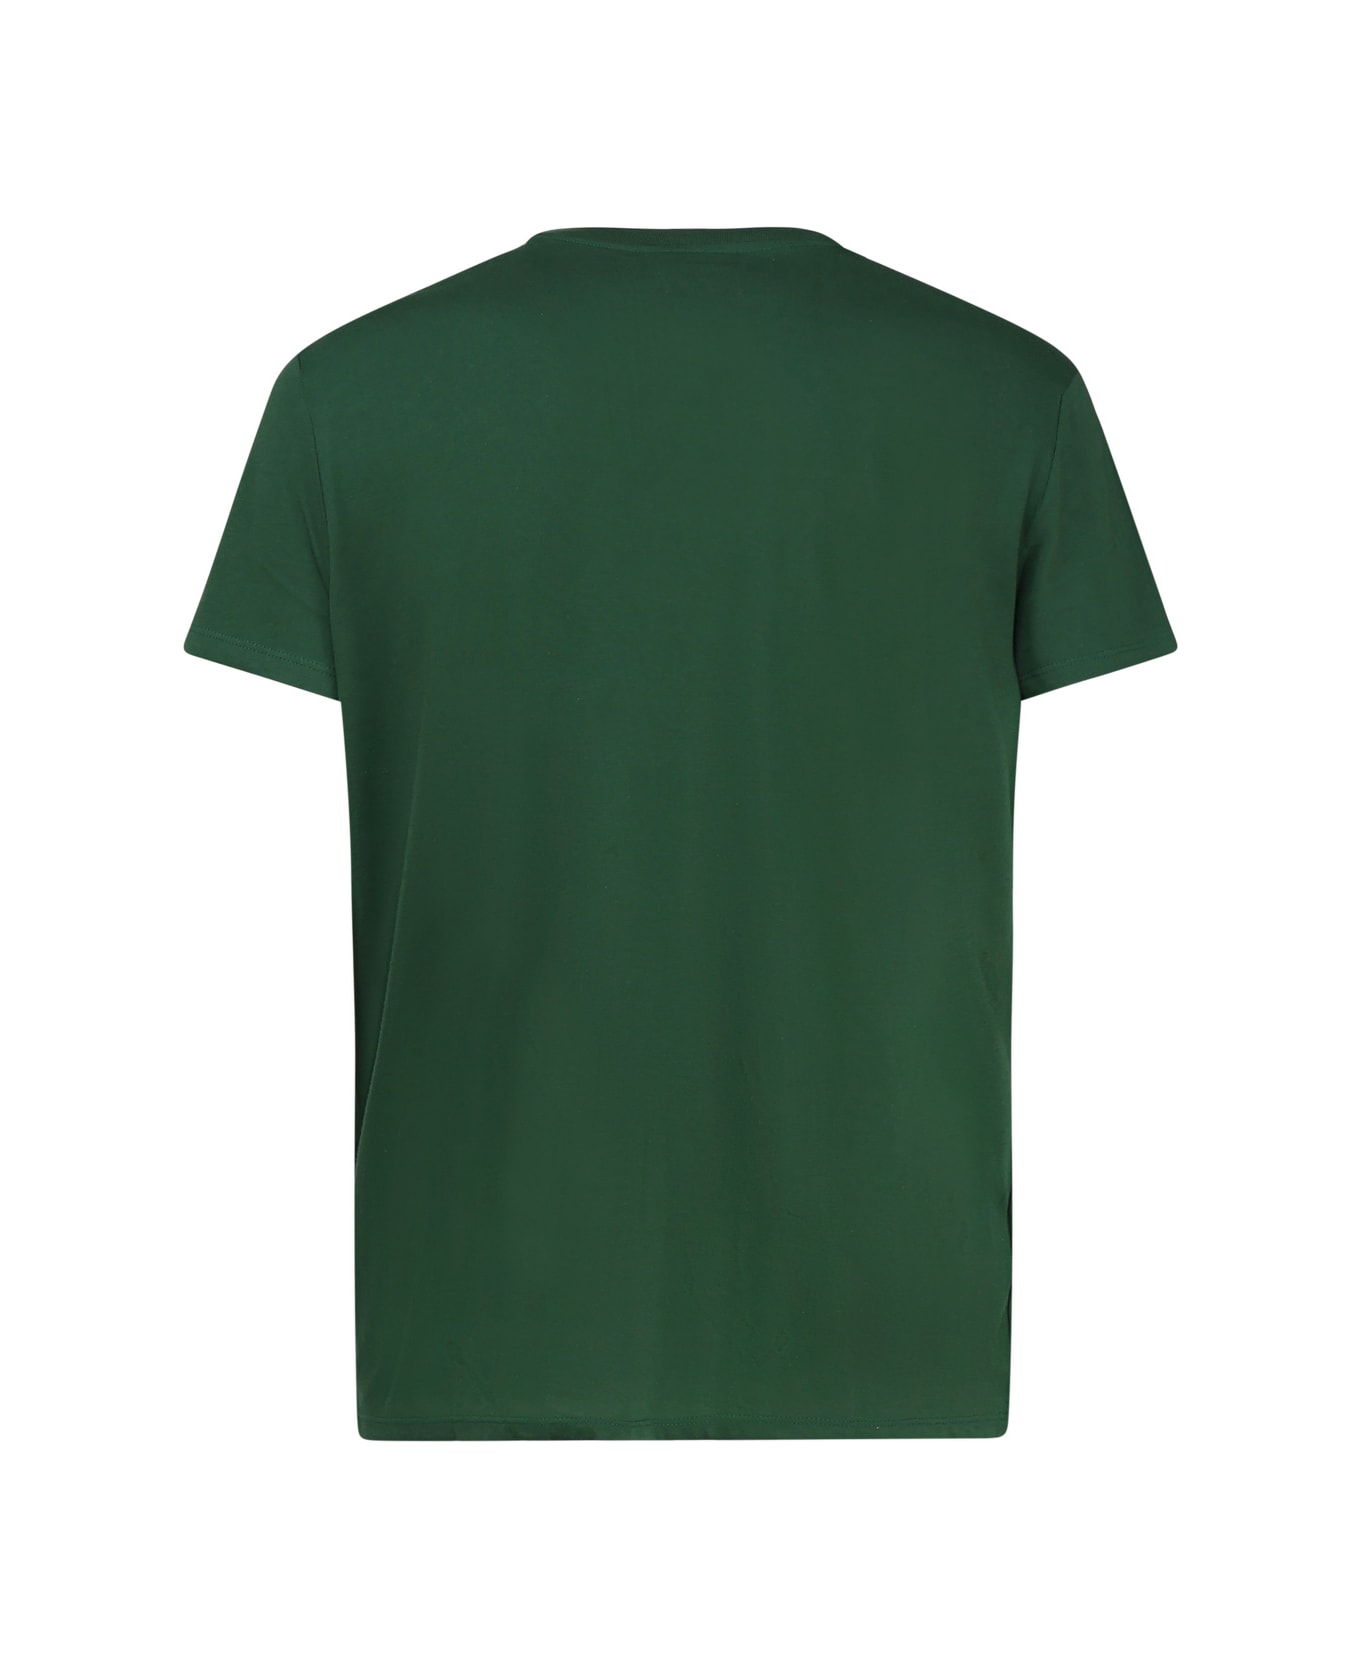 Lacoste Green T-shirt In Cotton Jersey - Verde